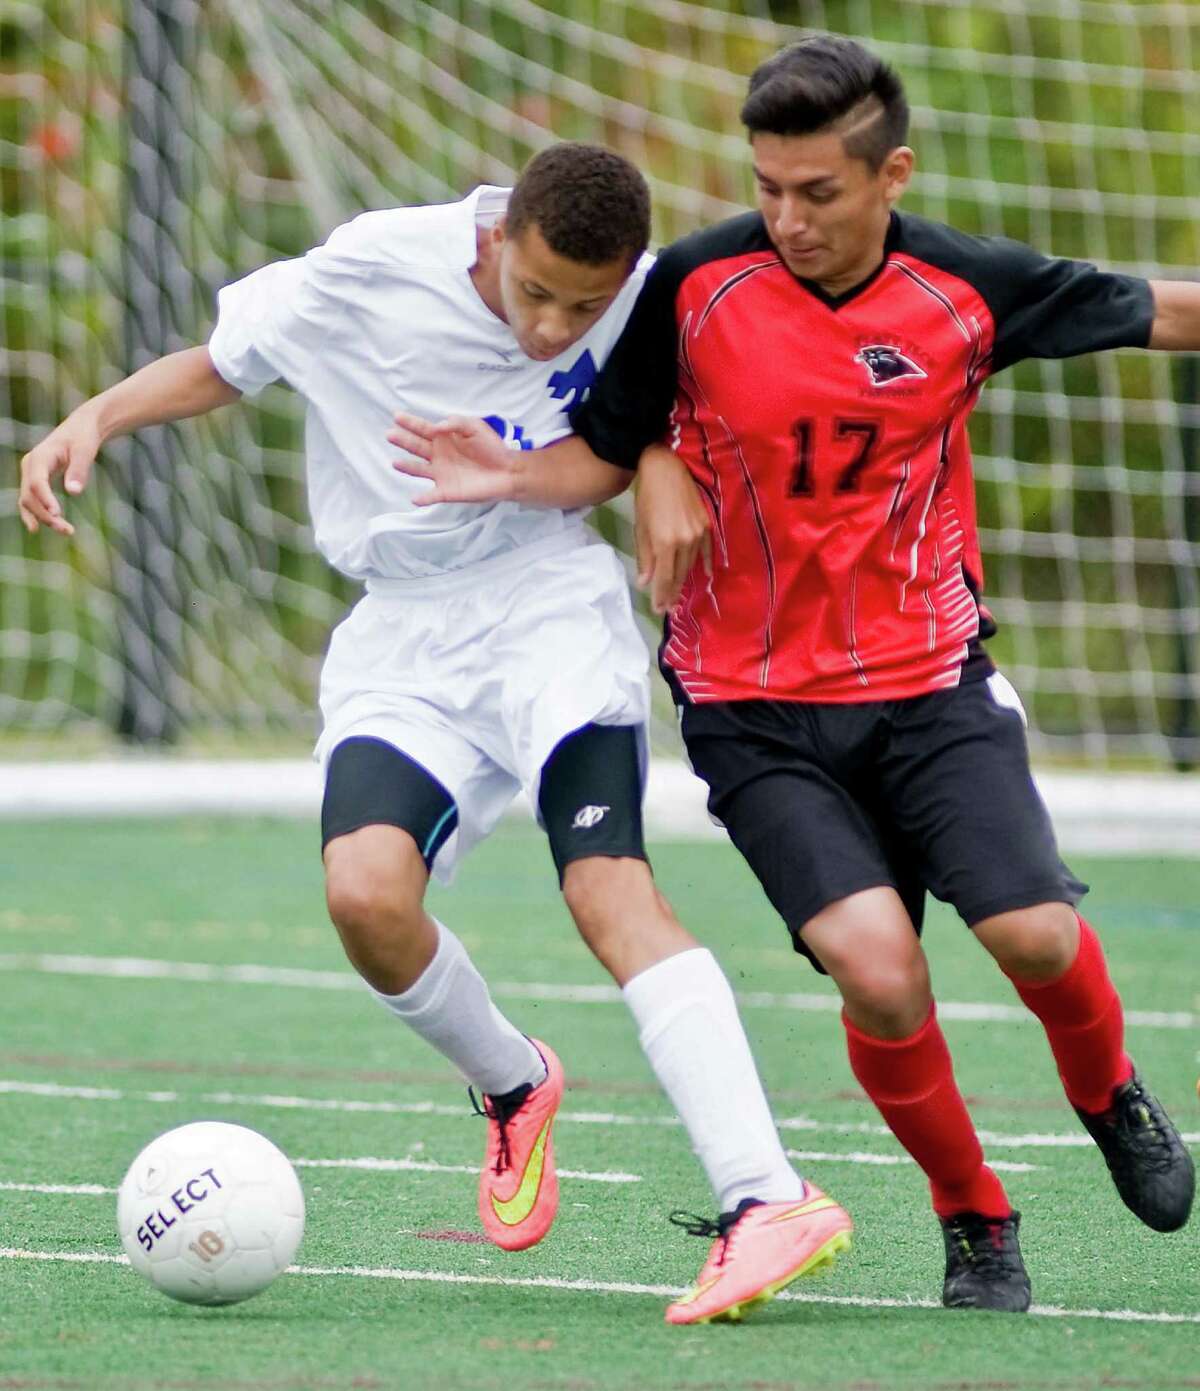 FILE PHOTO: Abbott Tech's Cristiano DaSilva and Platt Tech's Israel Zelocuatecat shove each other during a game at Broadview Middle School in Danbury. Thursday, Sept. 25, 2014